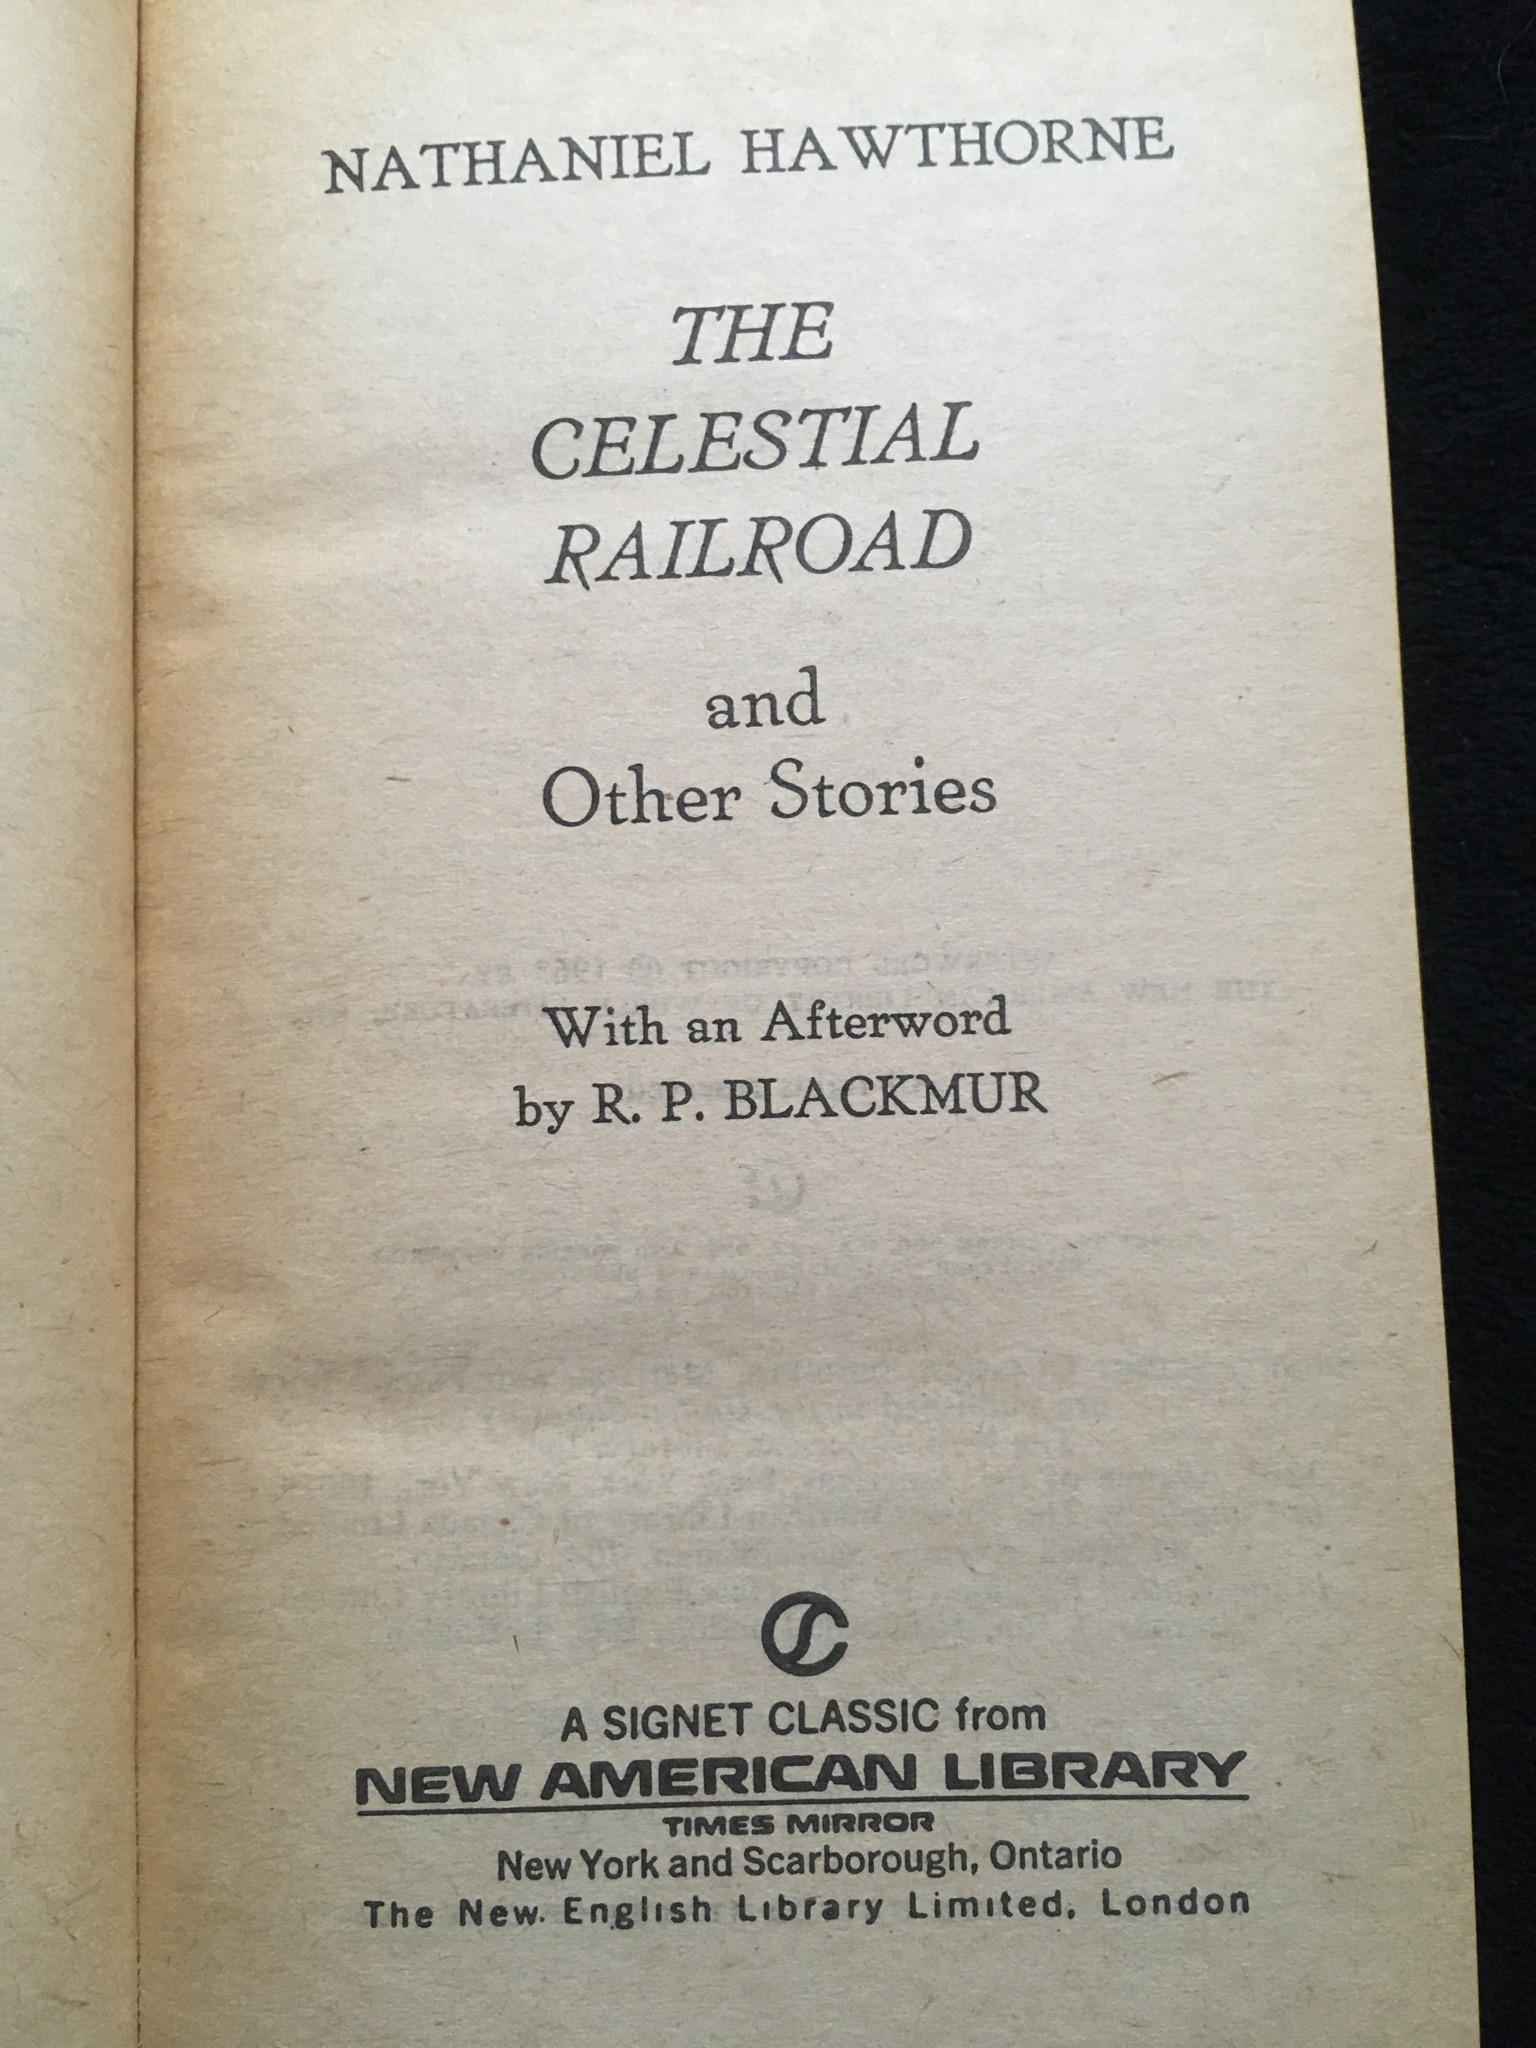 The Celestial Railroad and Other Stories by Nathaniel Hawthorne